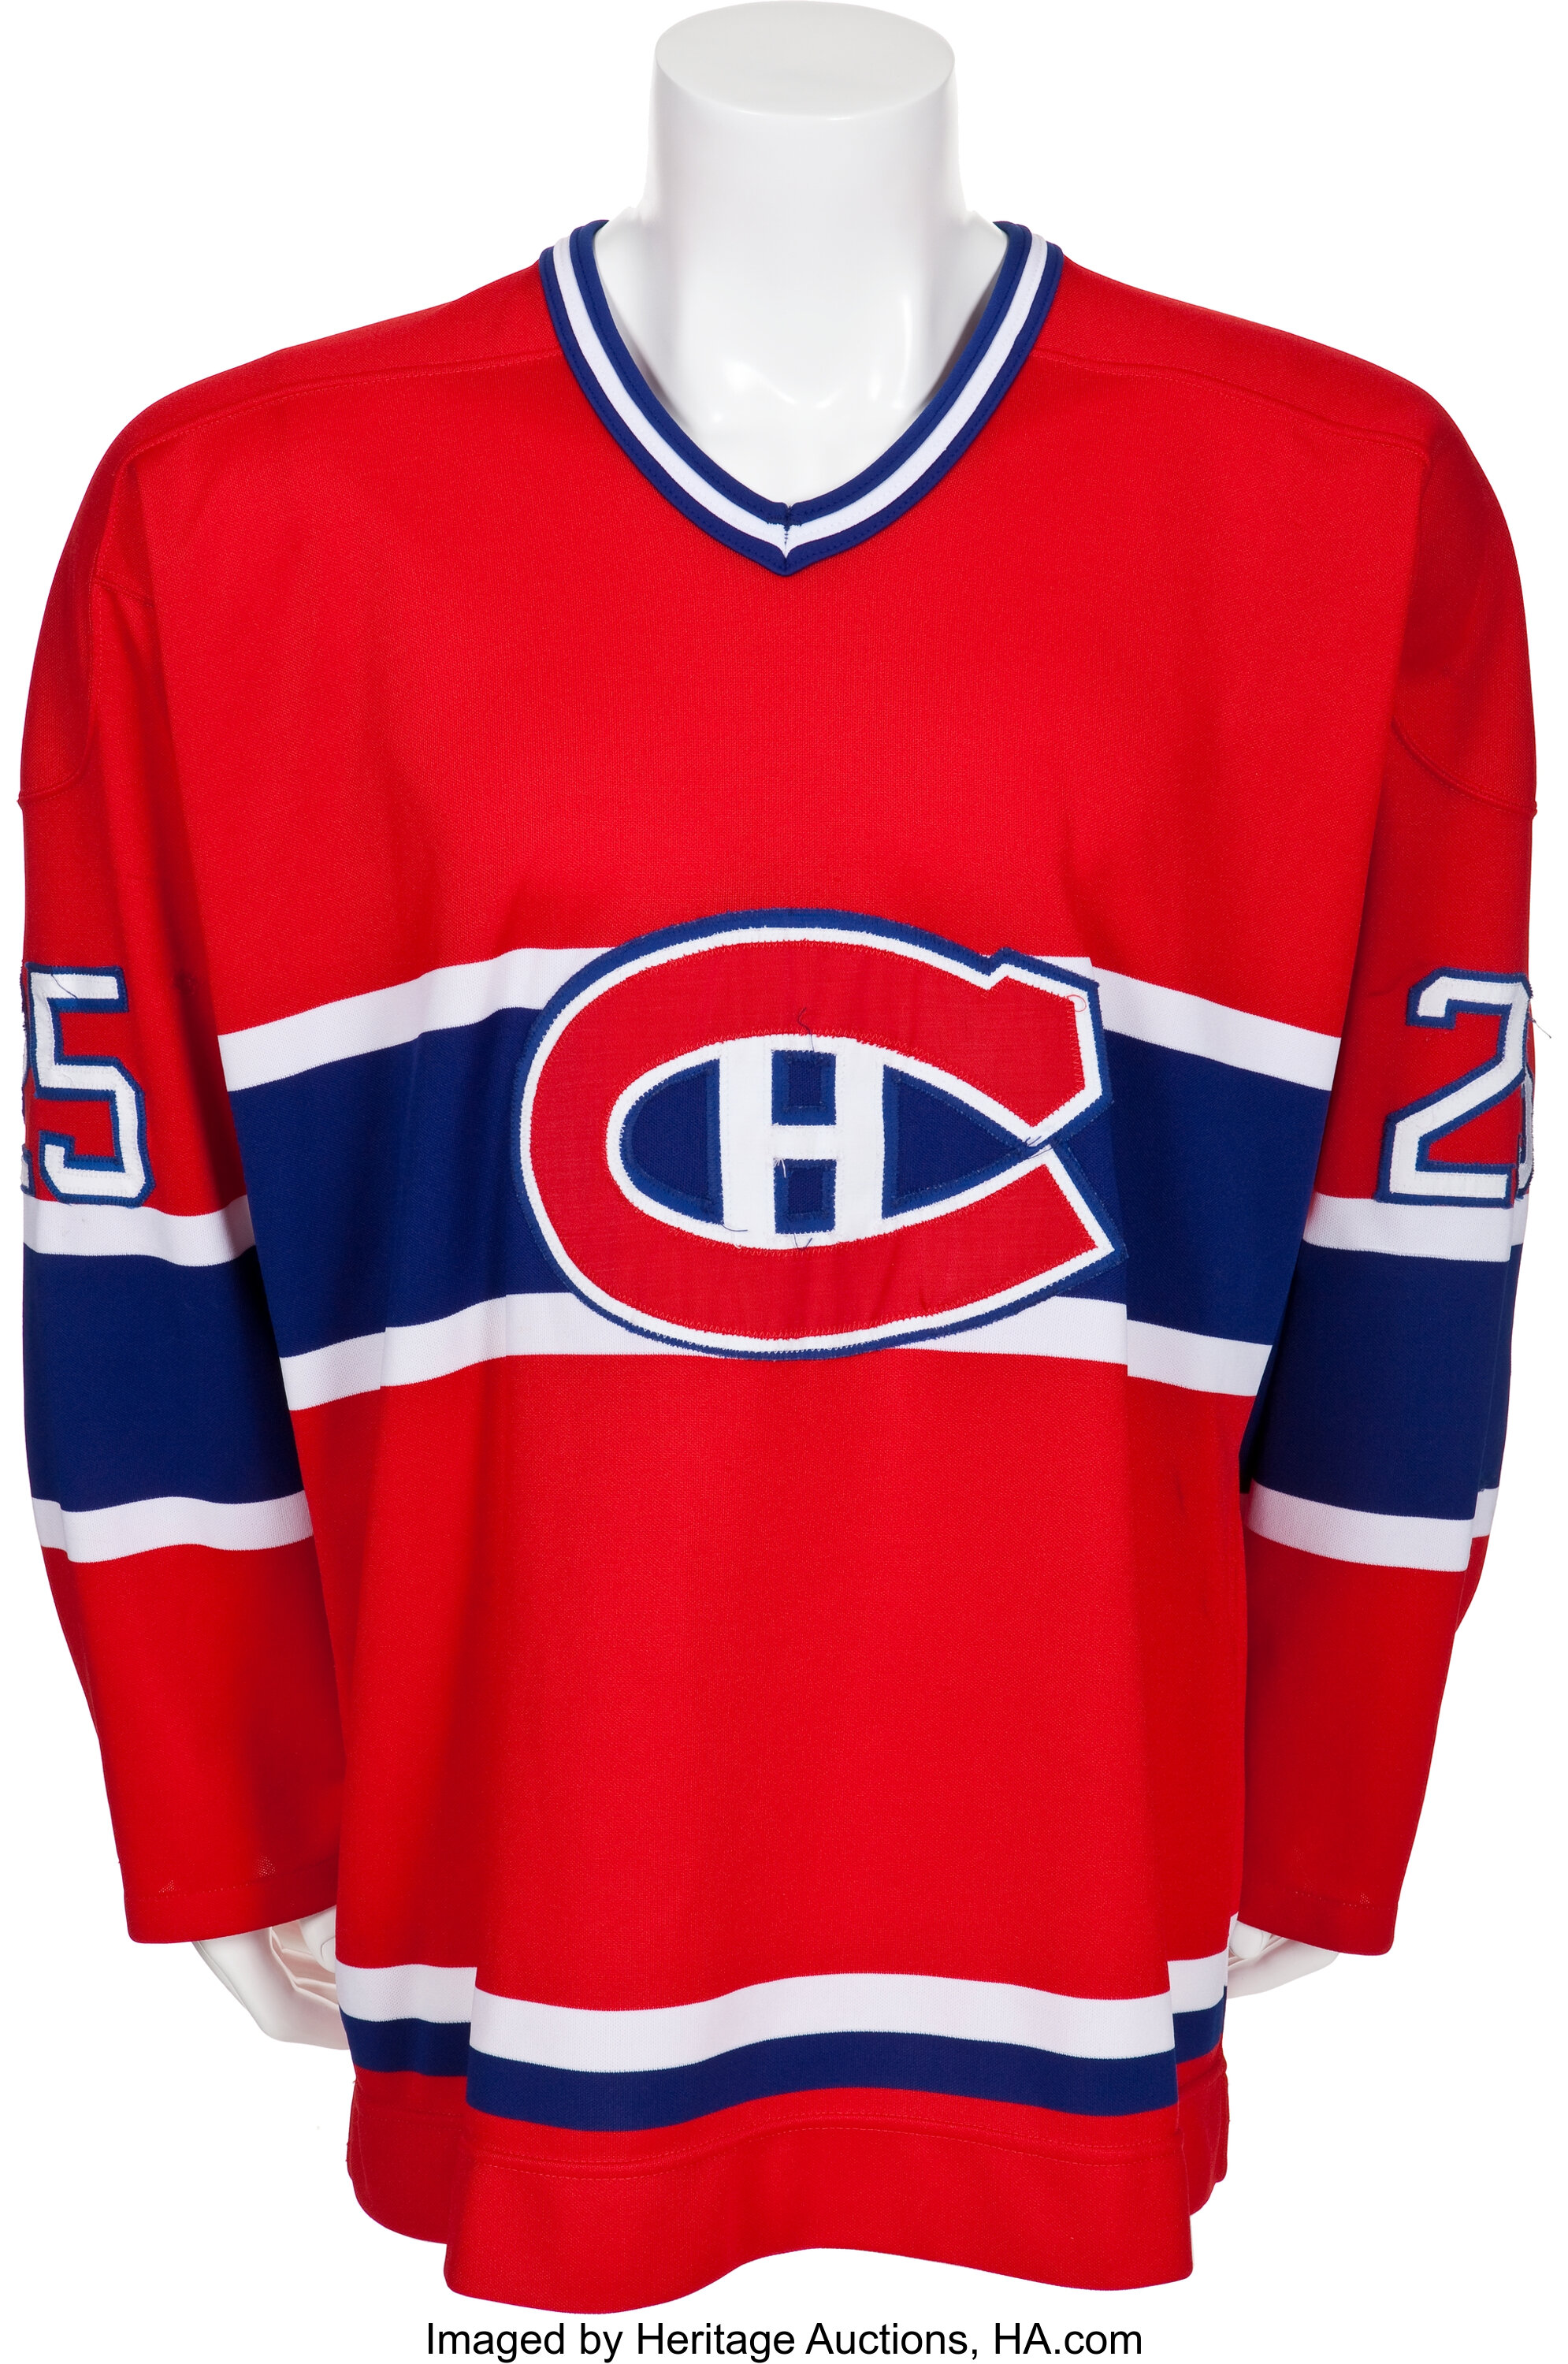 Montreal Canadiens Barber Pole Jersey Thanks to u/dave6687 : r